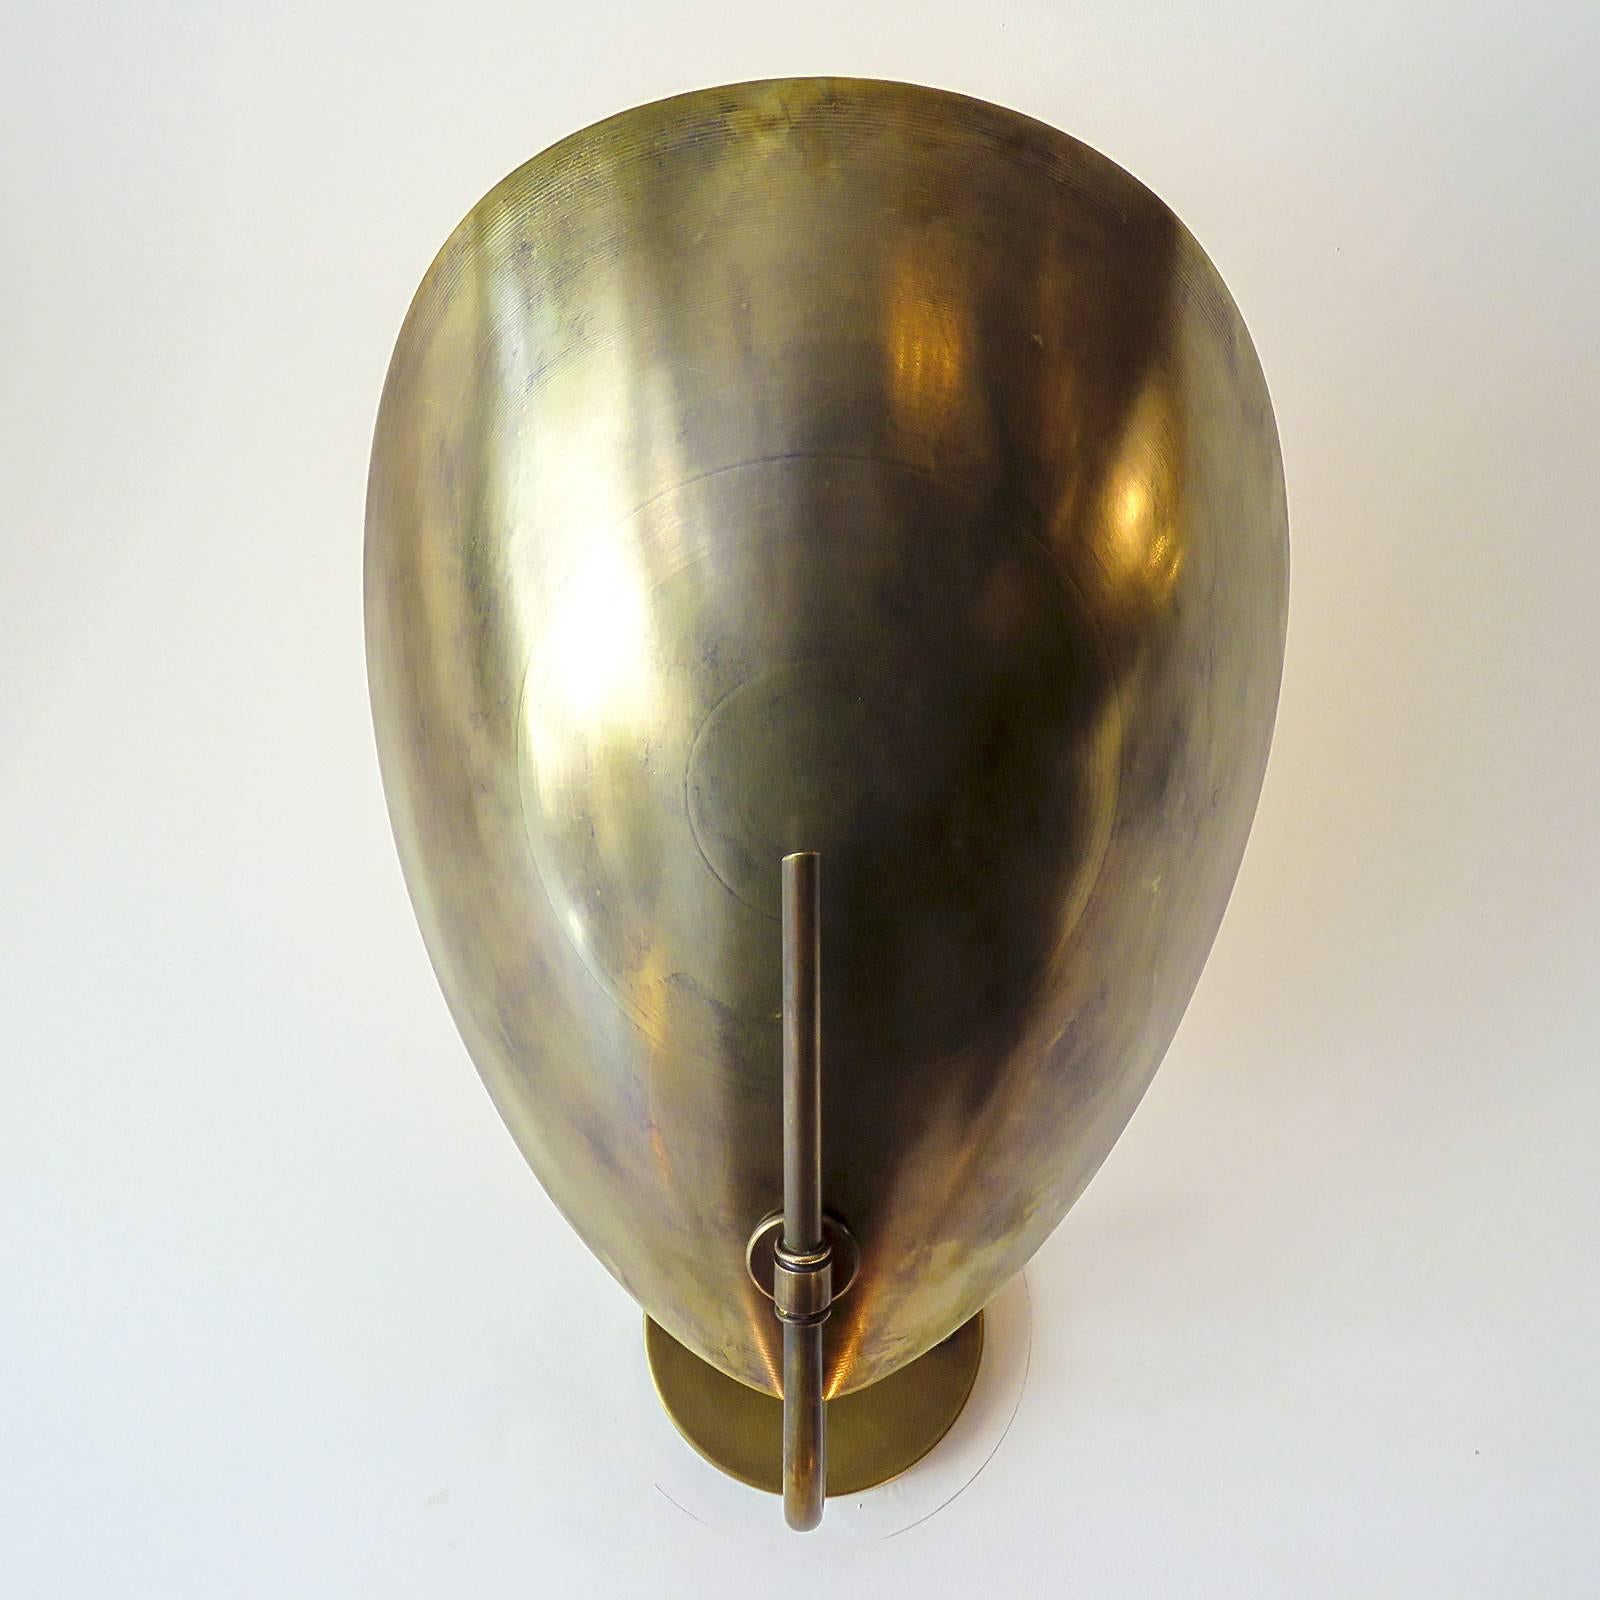 Great brass sconces, reminiscent of beetle armor, also available with individual on/off pull switch. One E26 socket per fixture, max. wattage 60w each, UL listing available upon request for an additional charge. Multiples available.